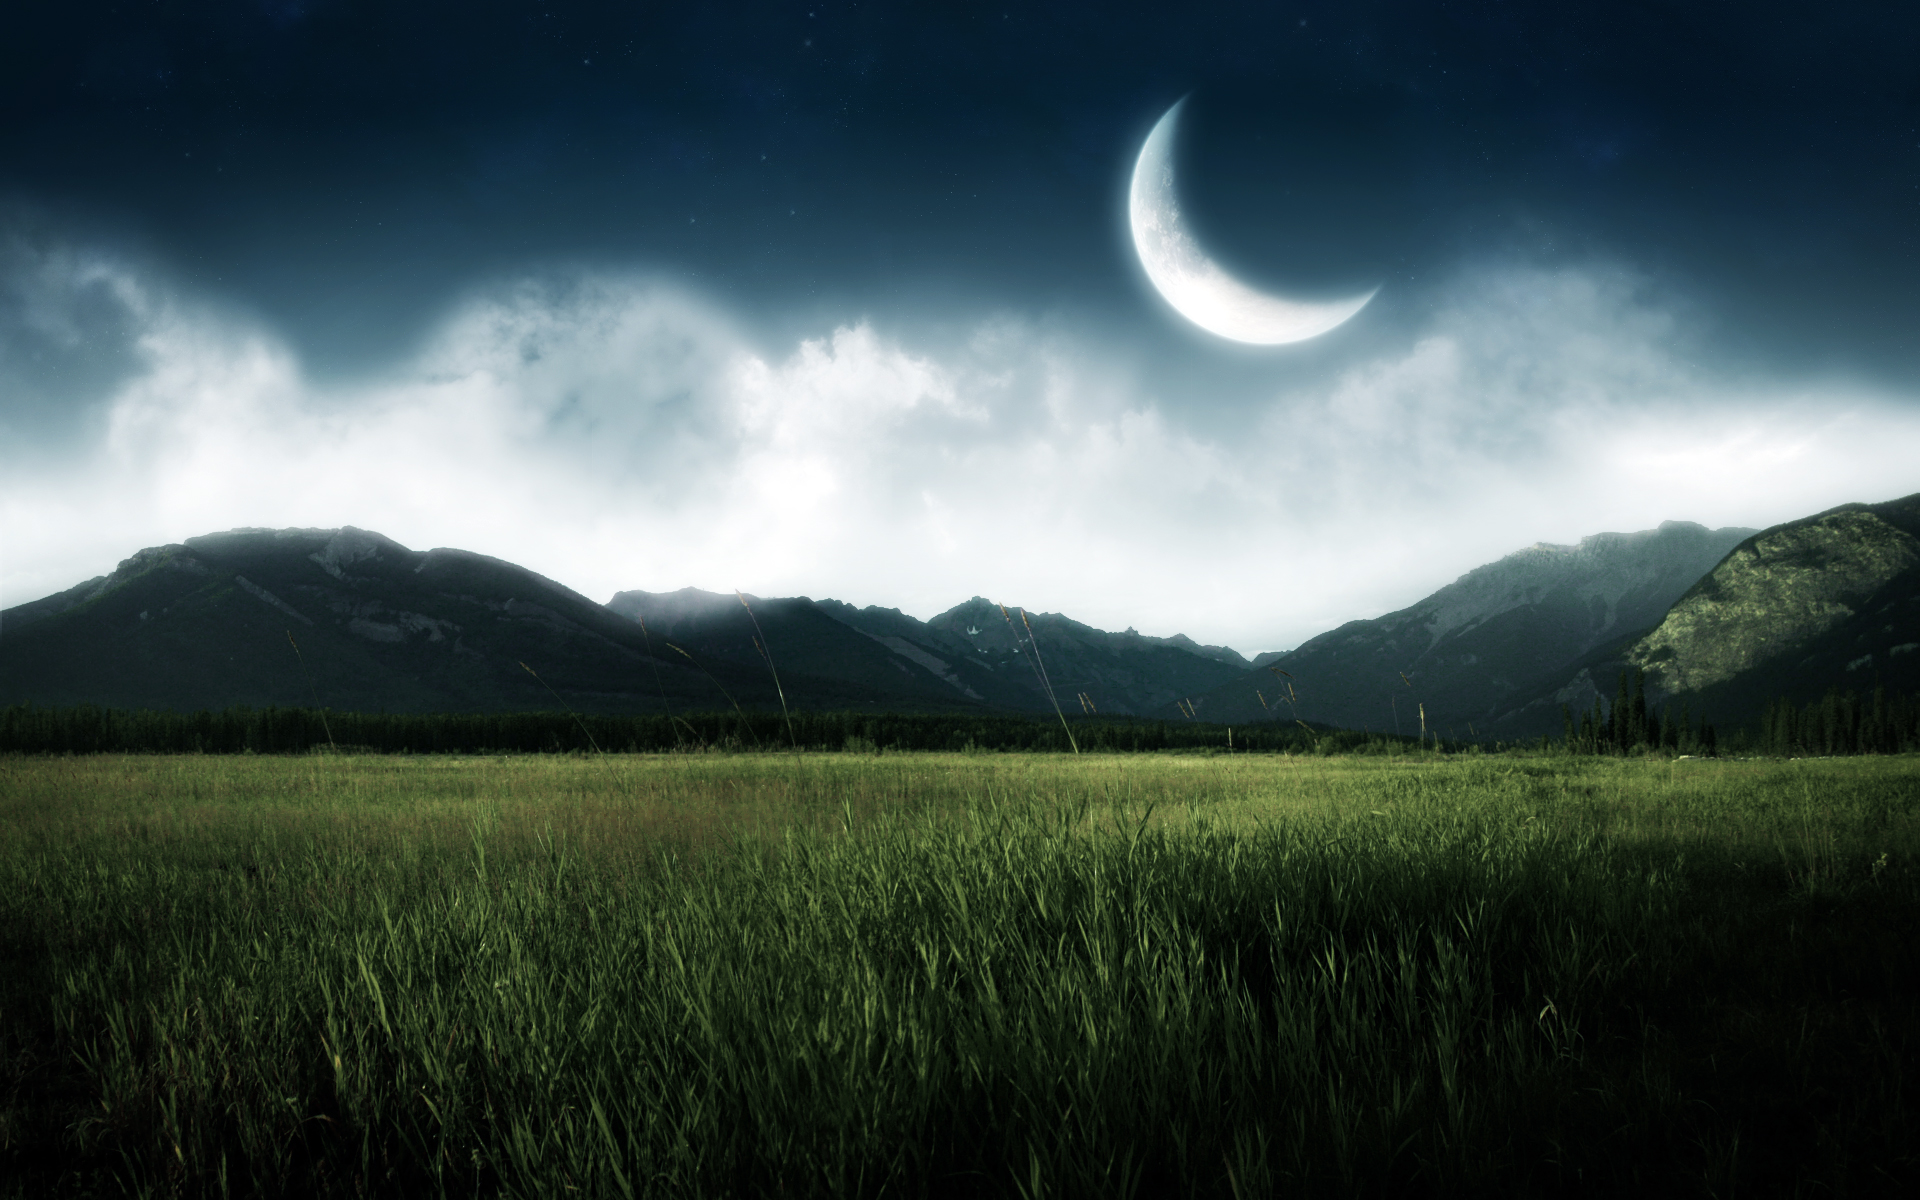 The moon shining over green grass, a mountain, and a cliff with clouds in the blue and black sky.